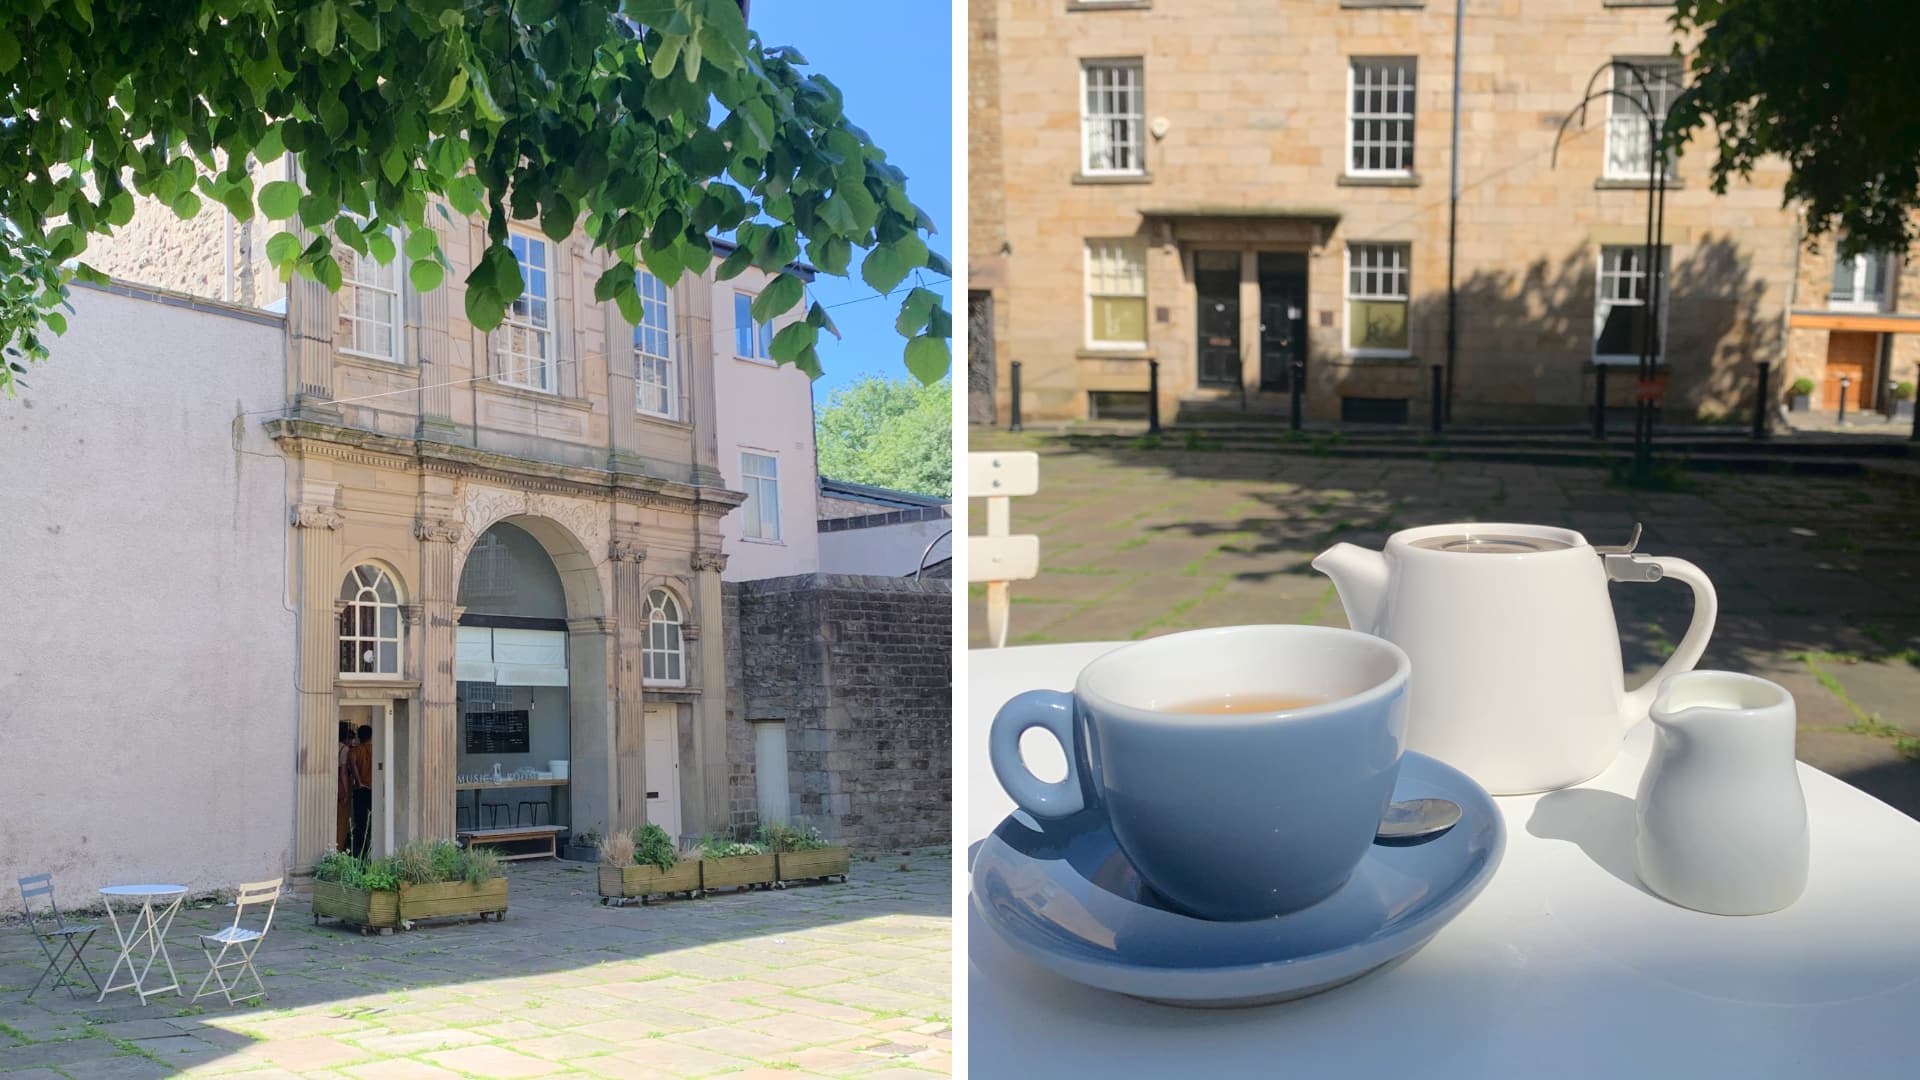 A montage of two photos of the outside of The Music Room cafe, one showing a pot of tea